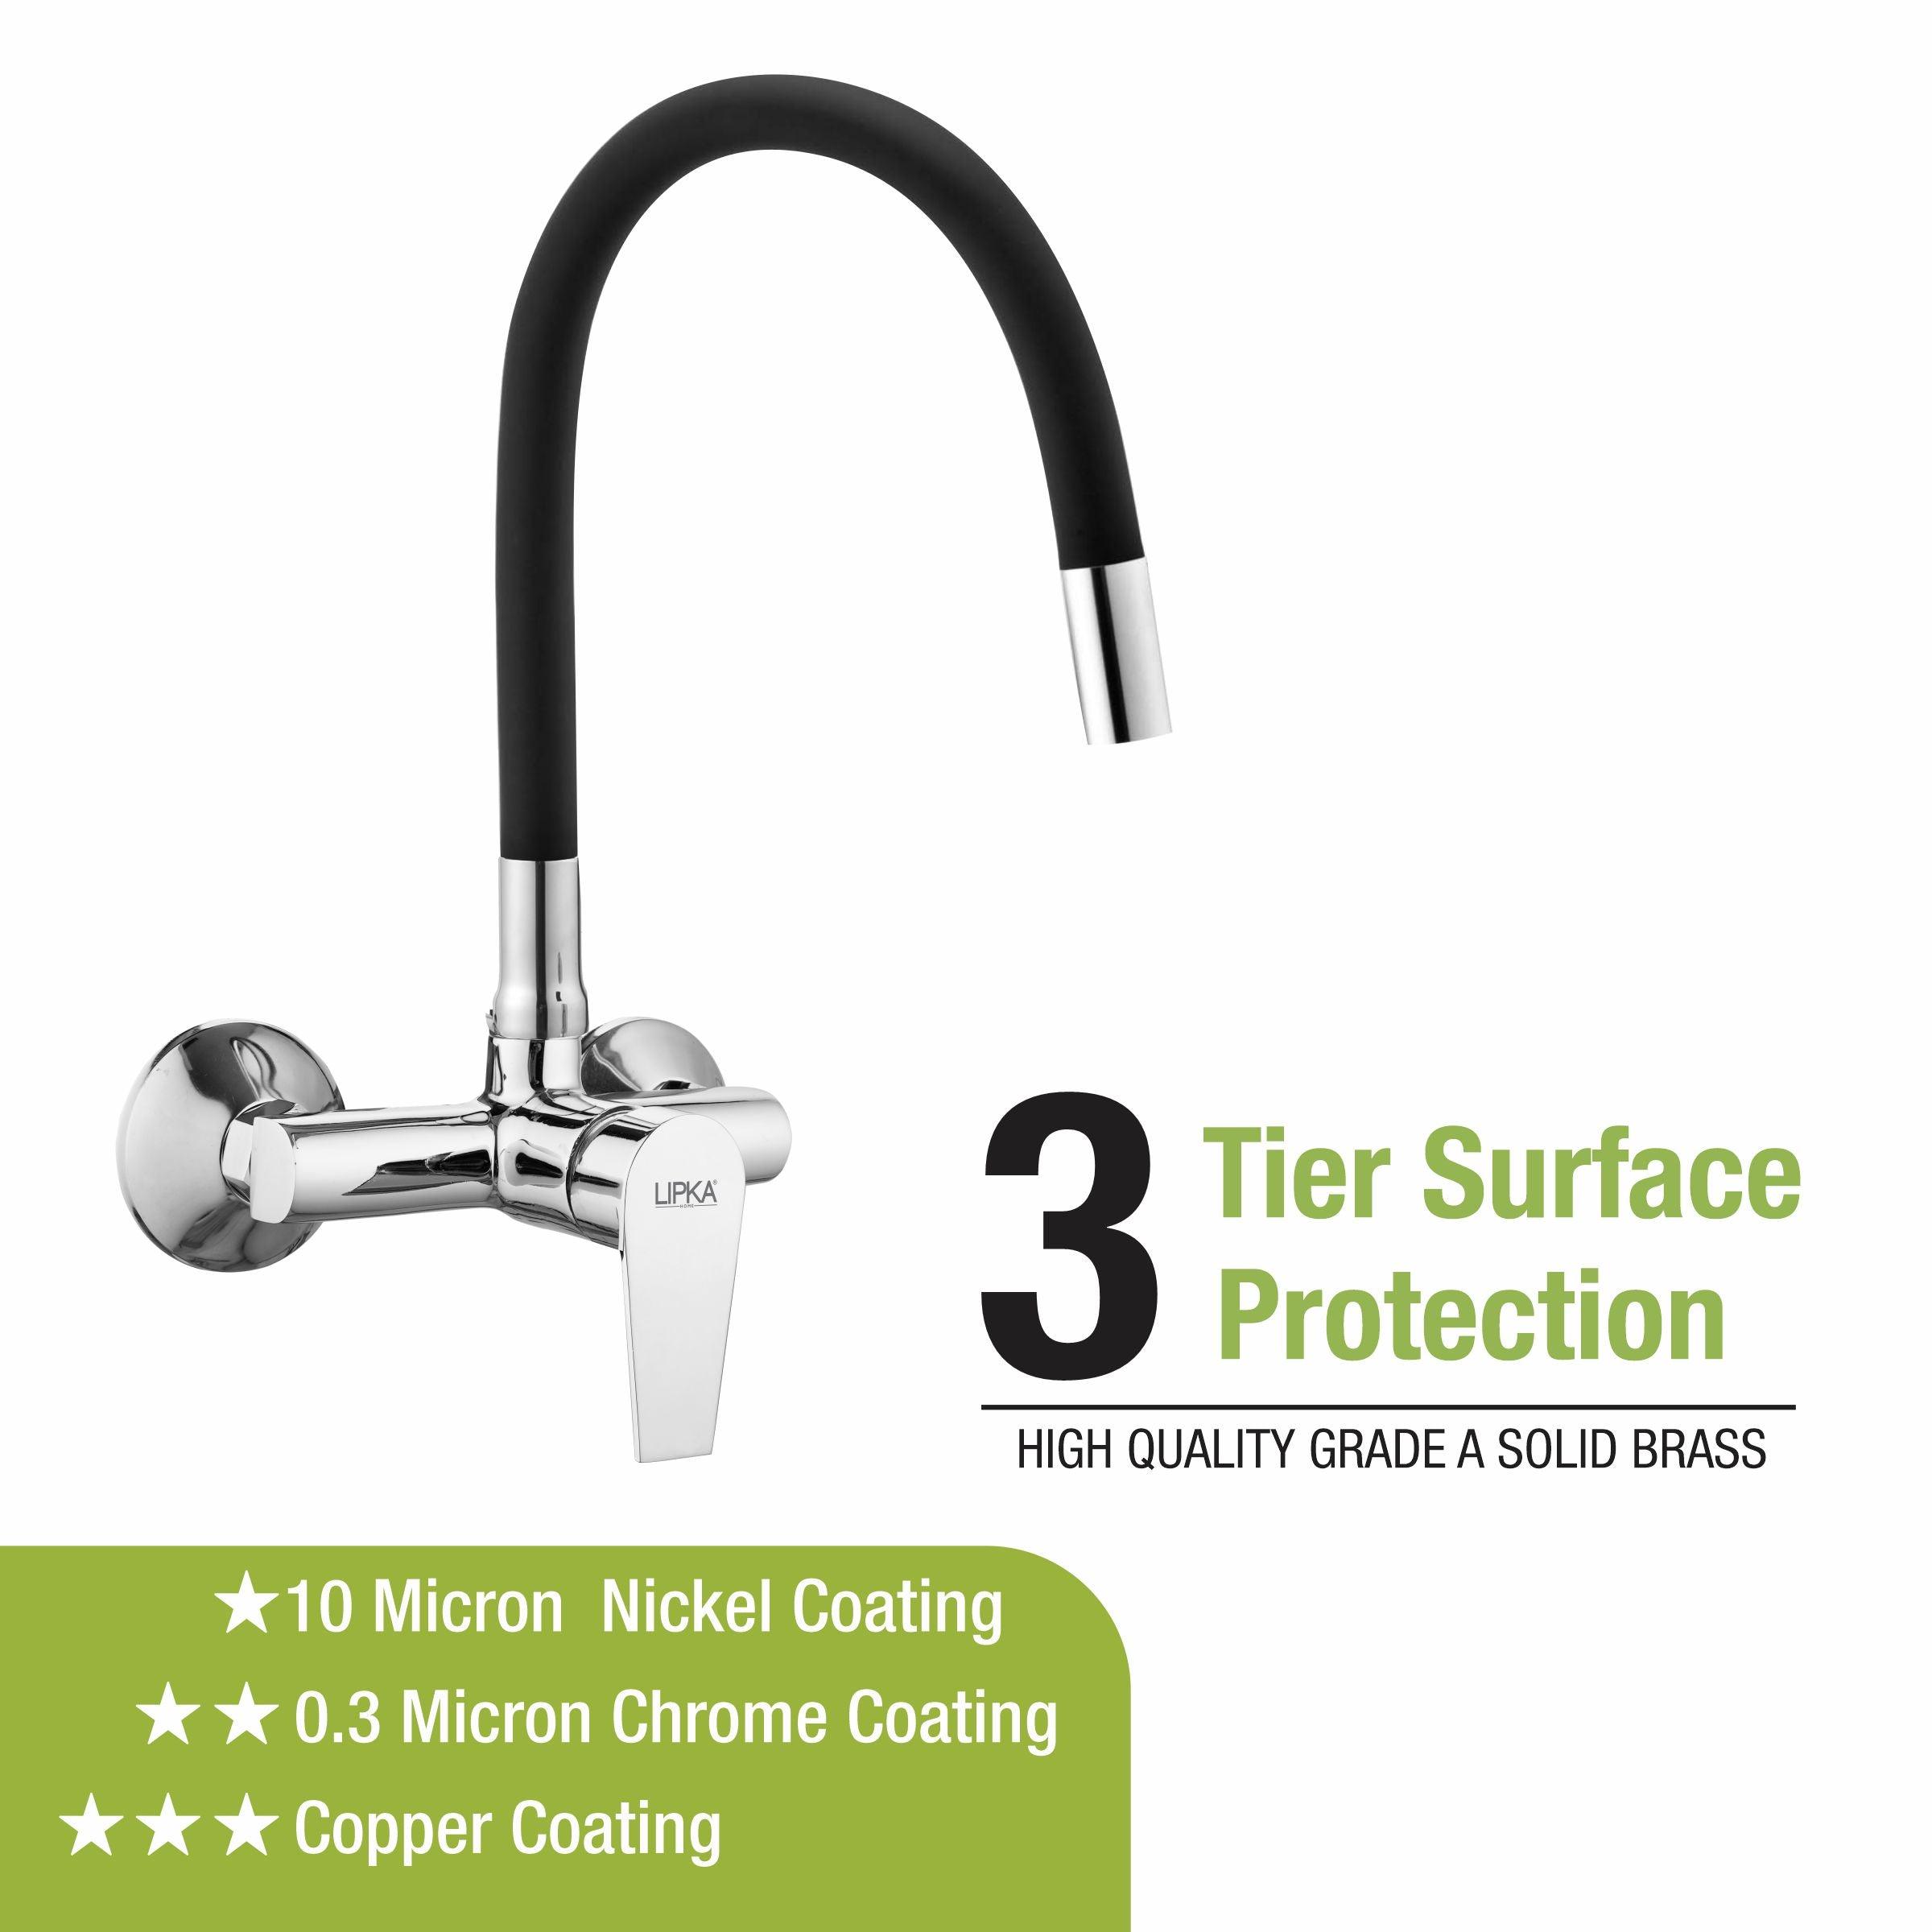 Victory Single Lever Sink Mixer with Black Flexible Silicone Spout (20 Inches) - LIPKA - Lipka Home